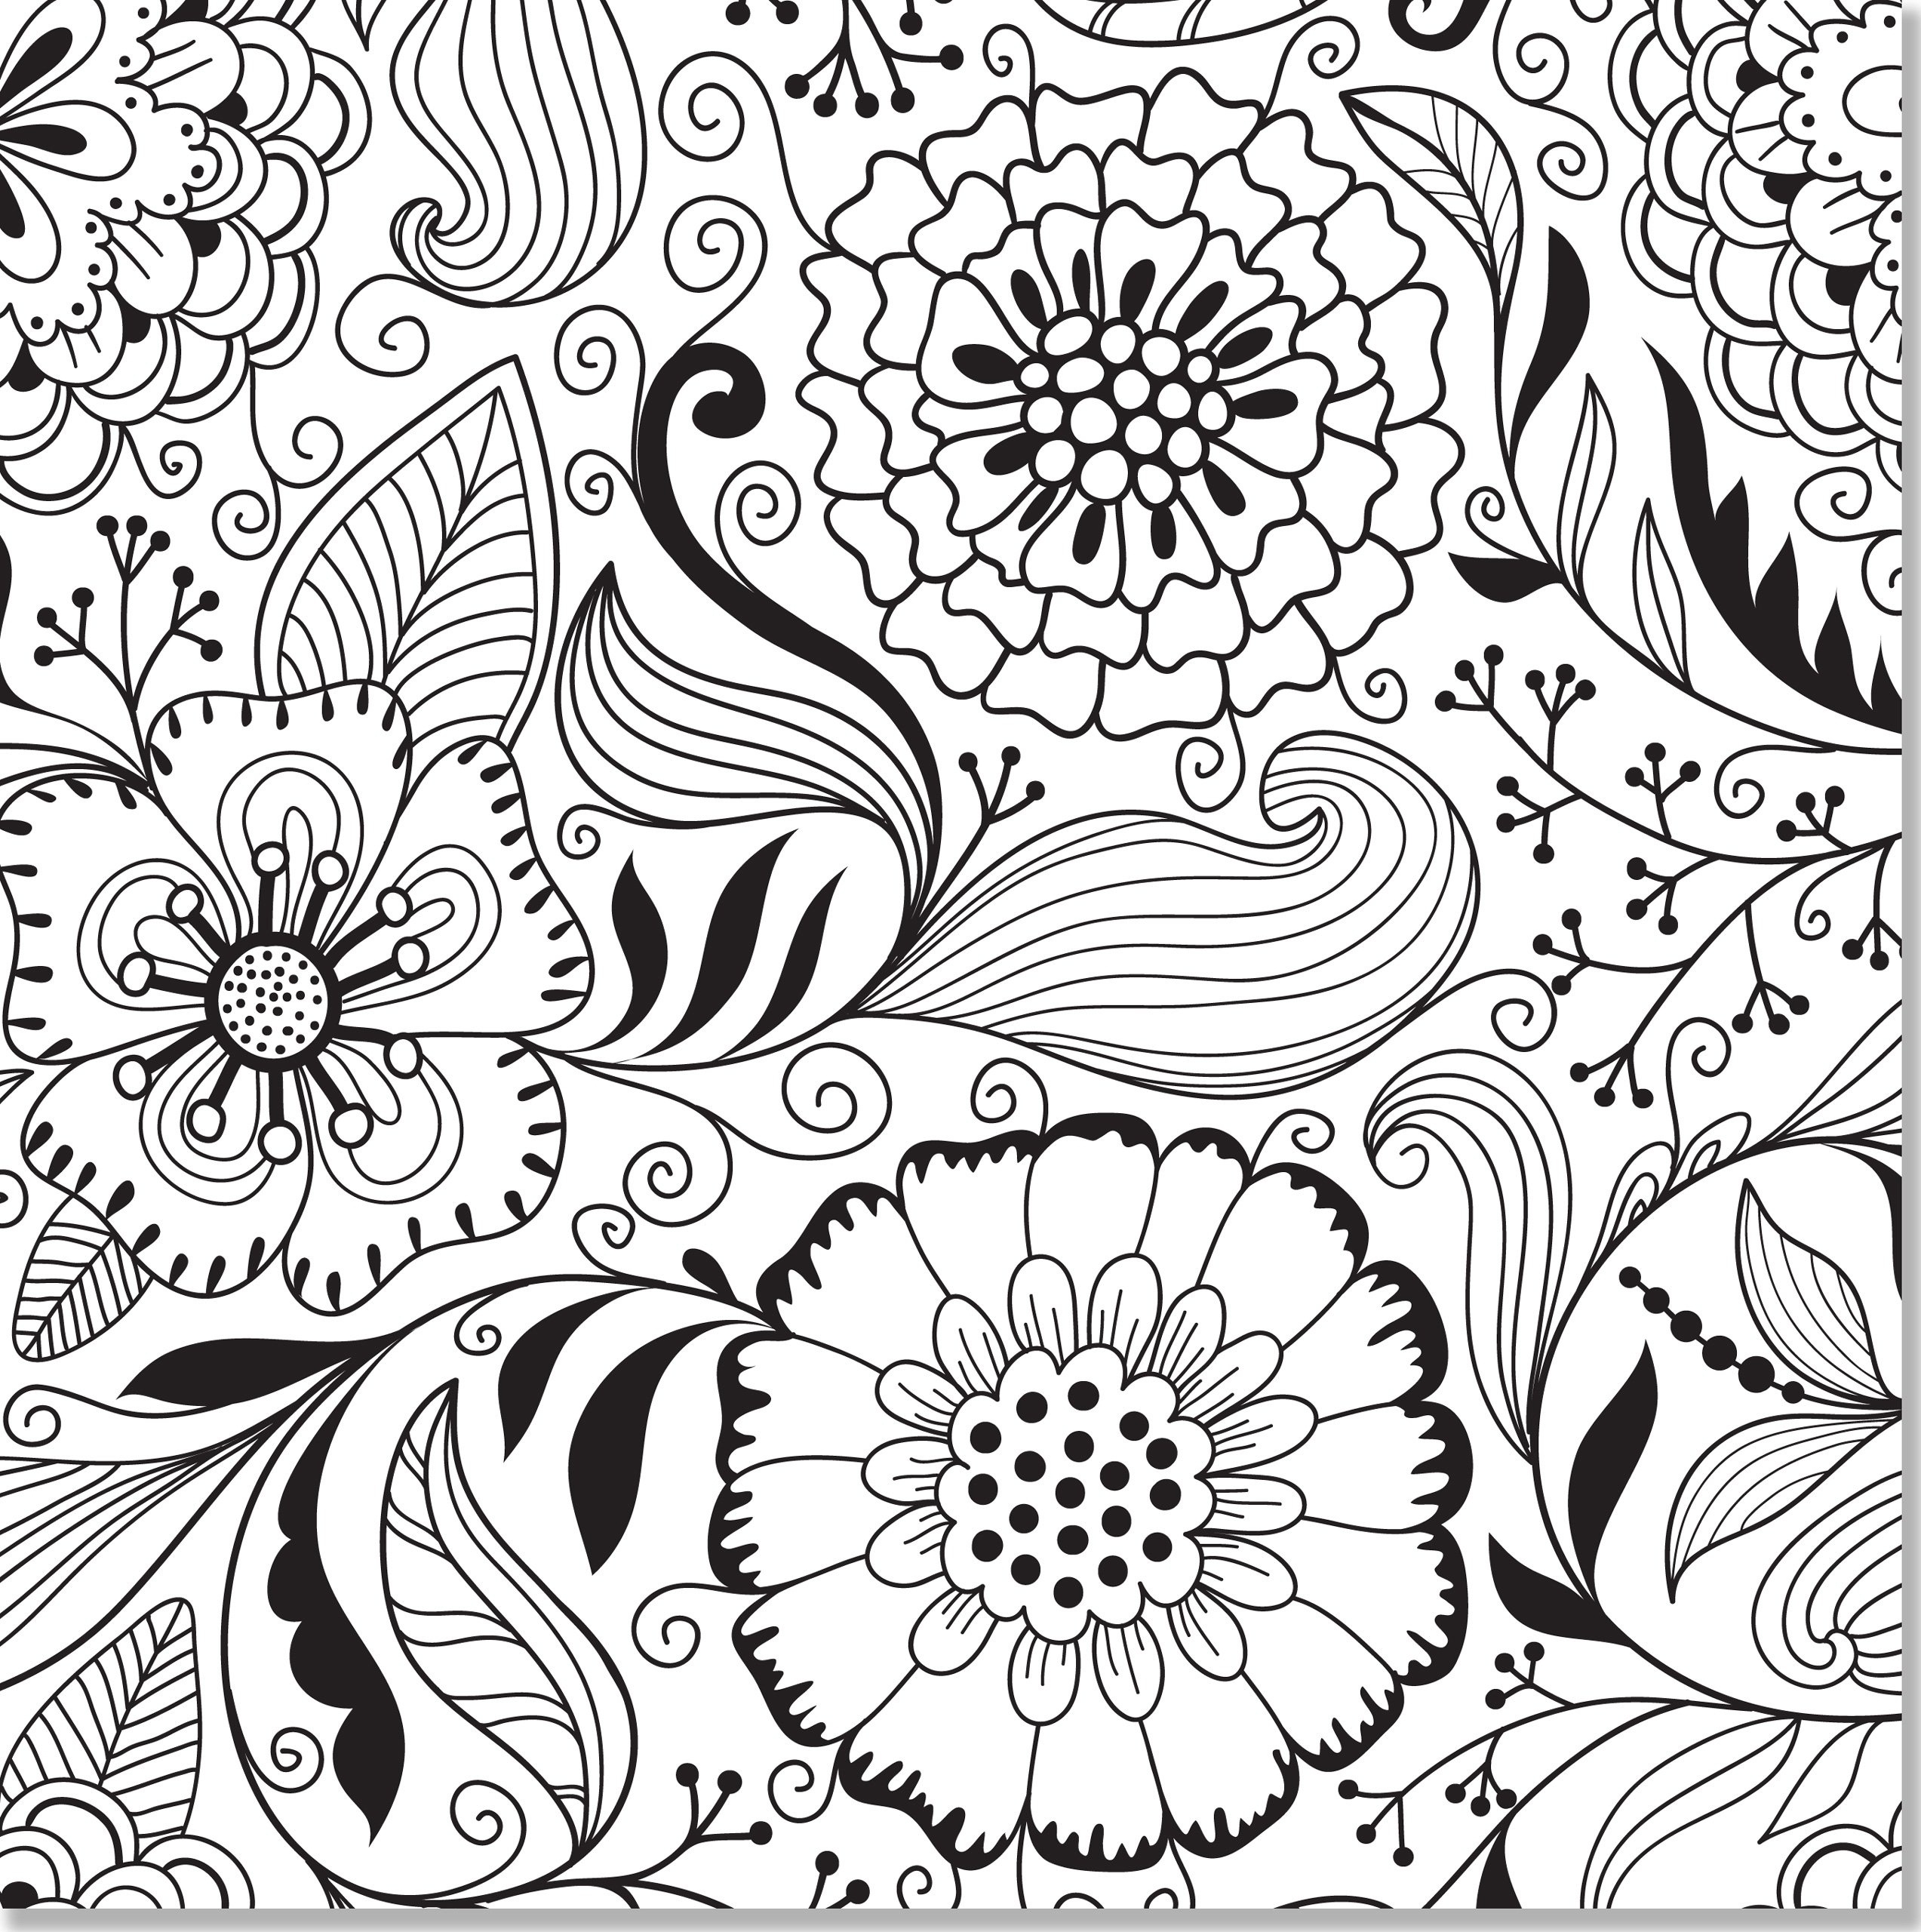 Awesome Free Printable Coloring Book Pages For Adults | Coloring Pages - Free Printable Coloring Pages For Adults Advanced